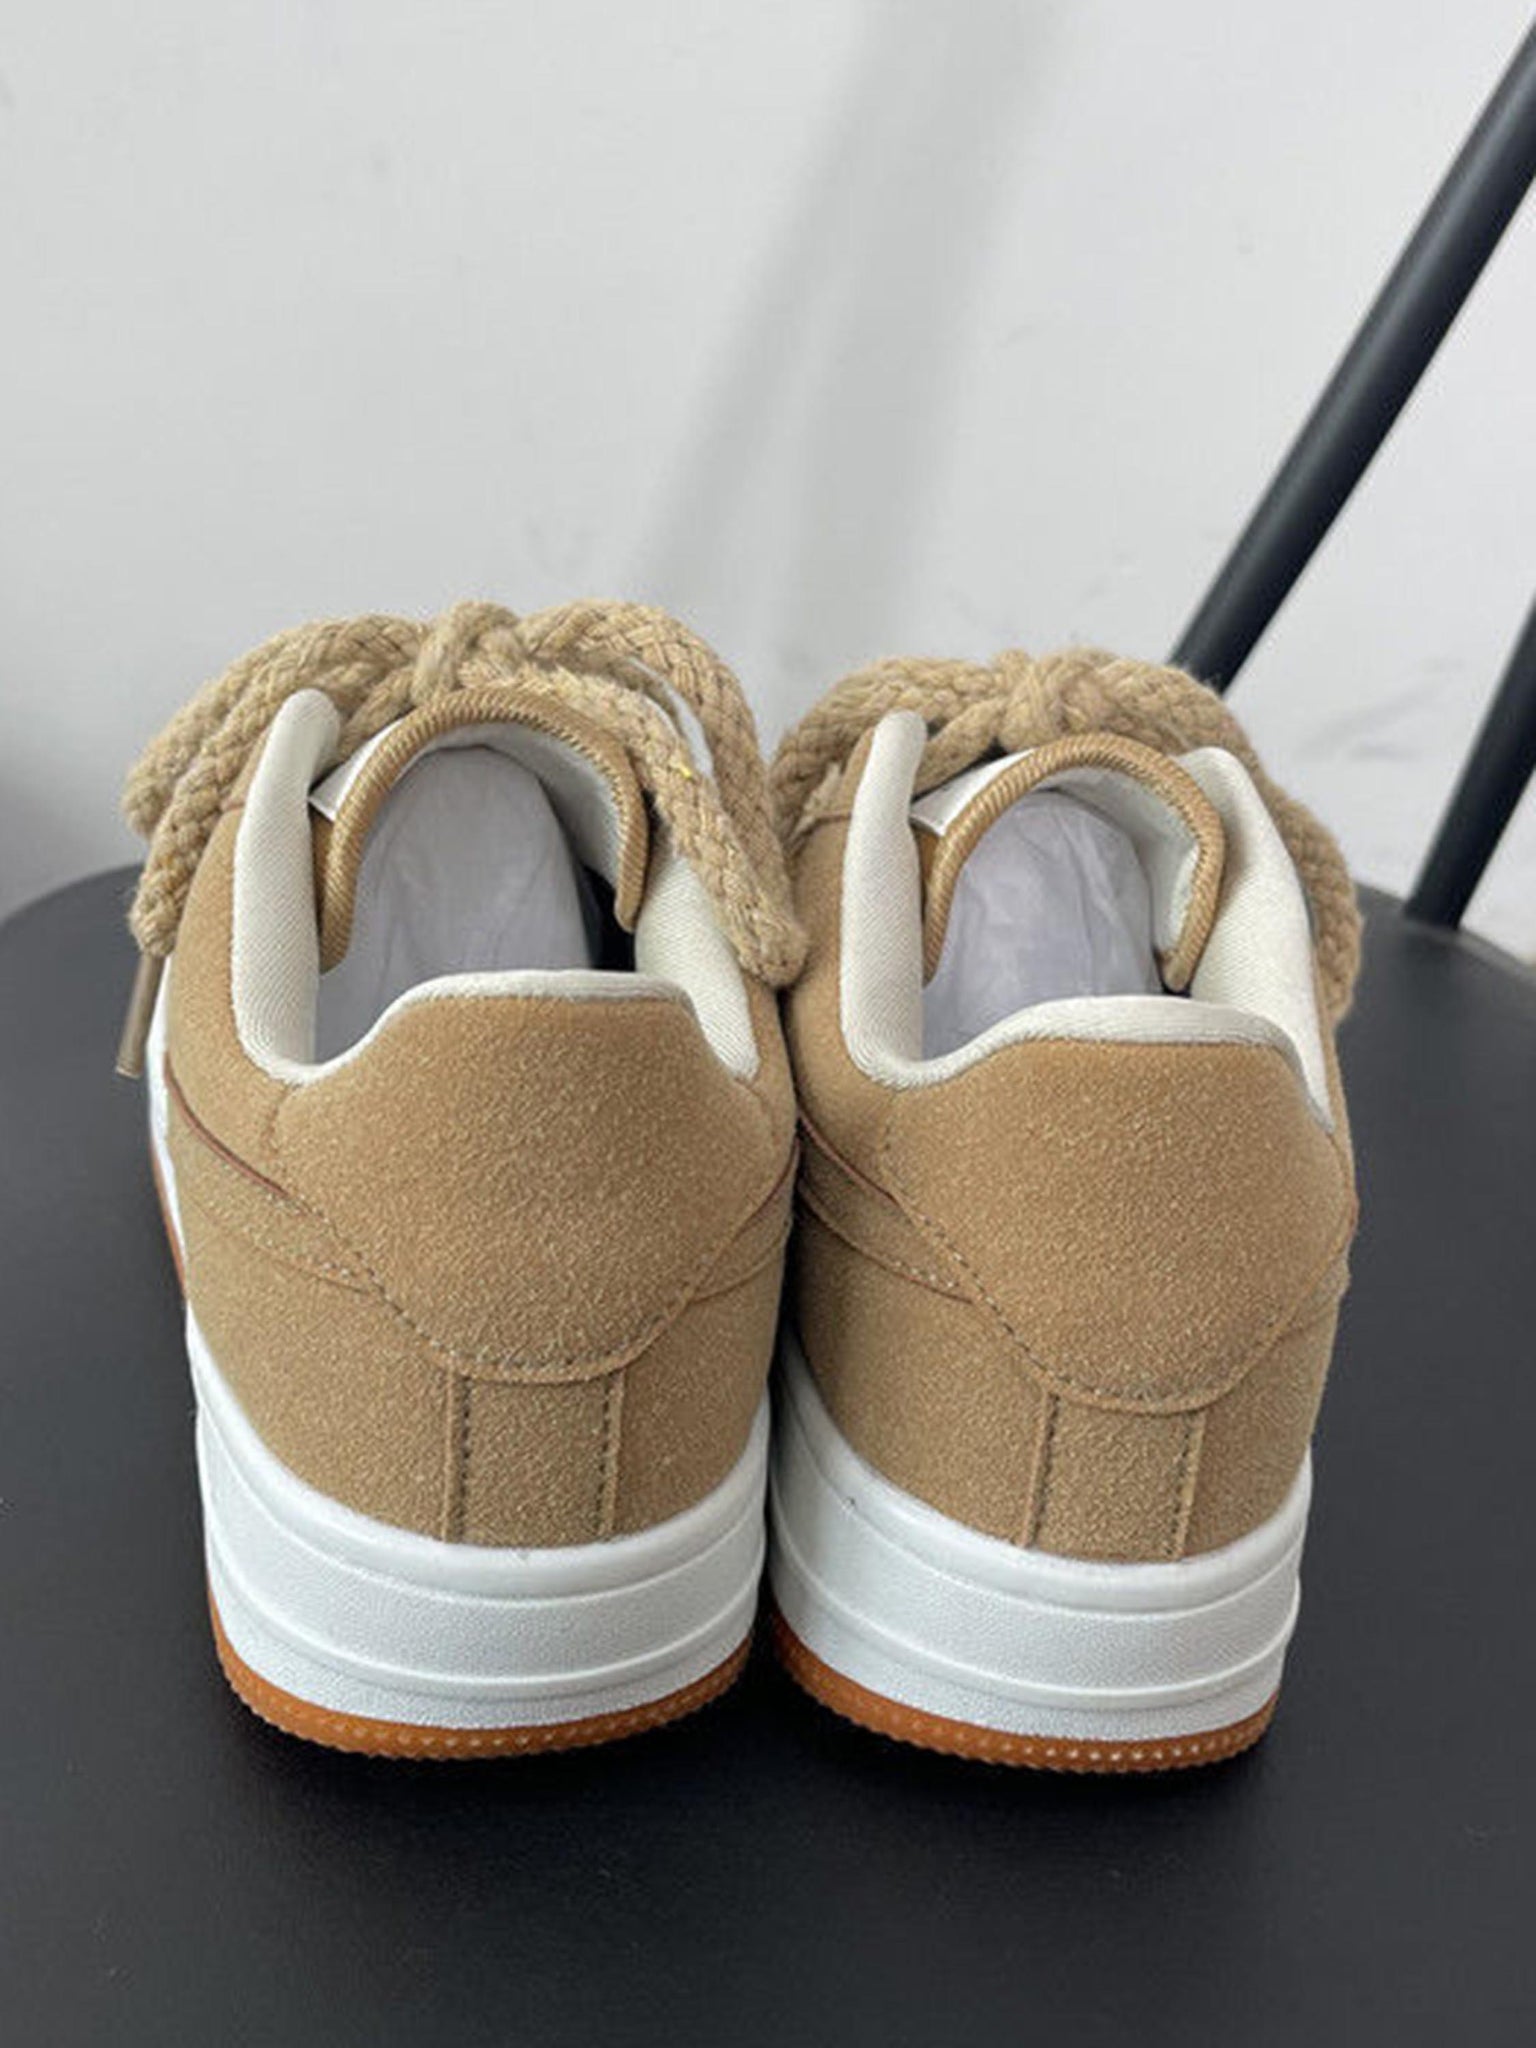 The Supermade American Hip Hop Trend Board Shoes Casual Sports Shoes